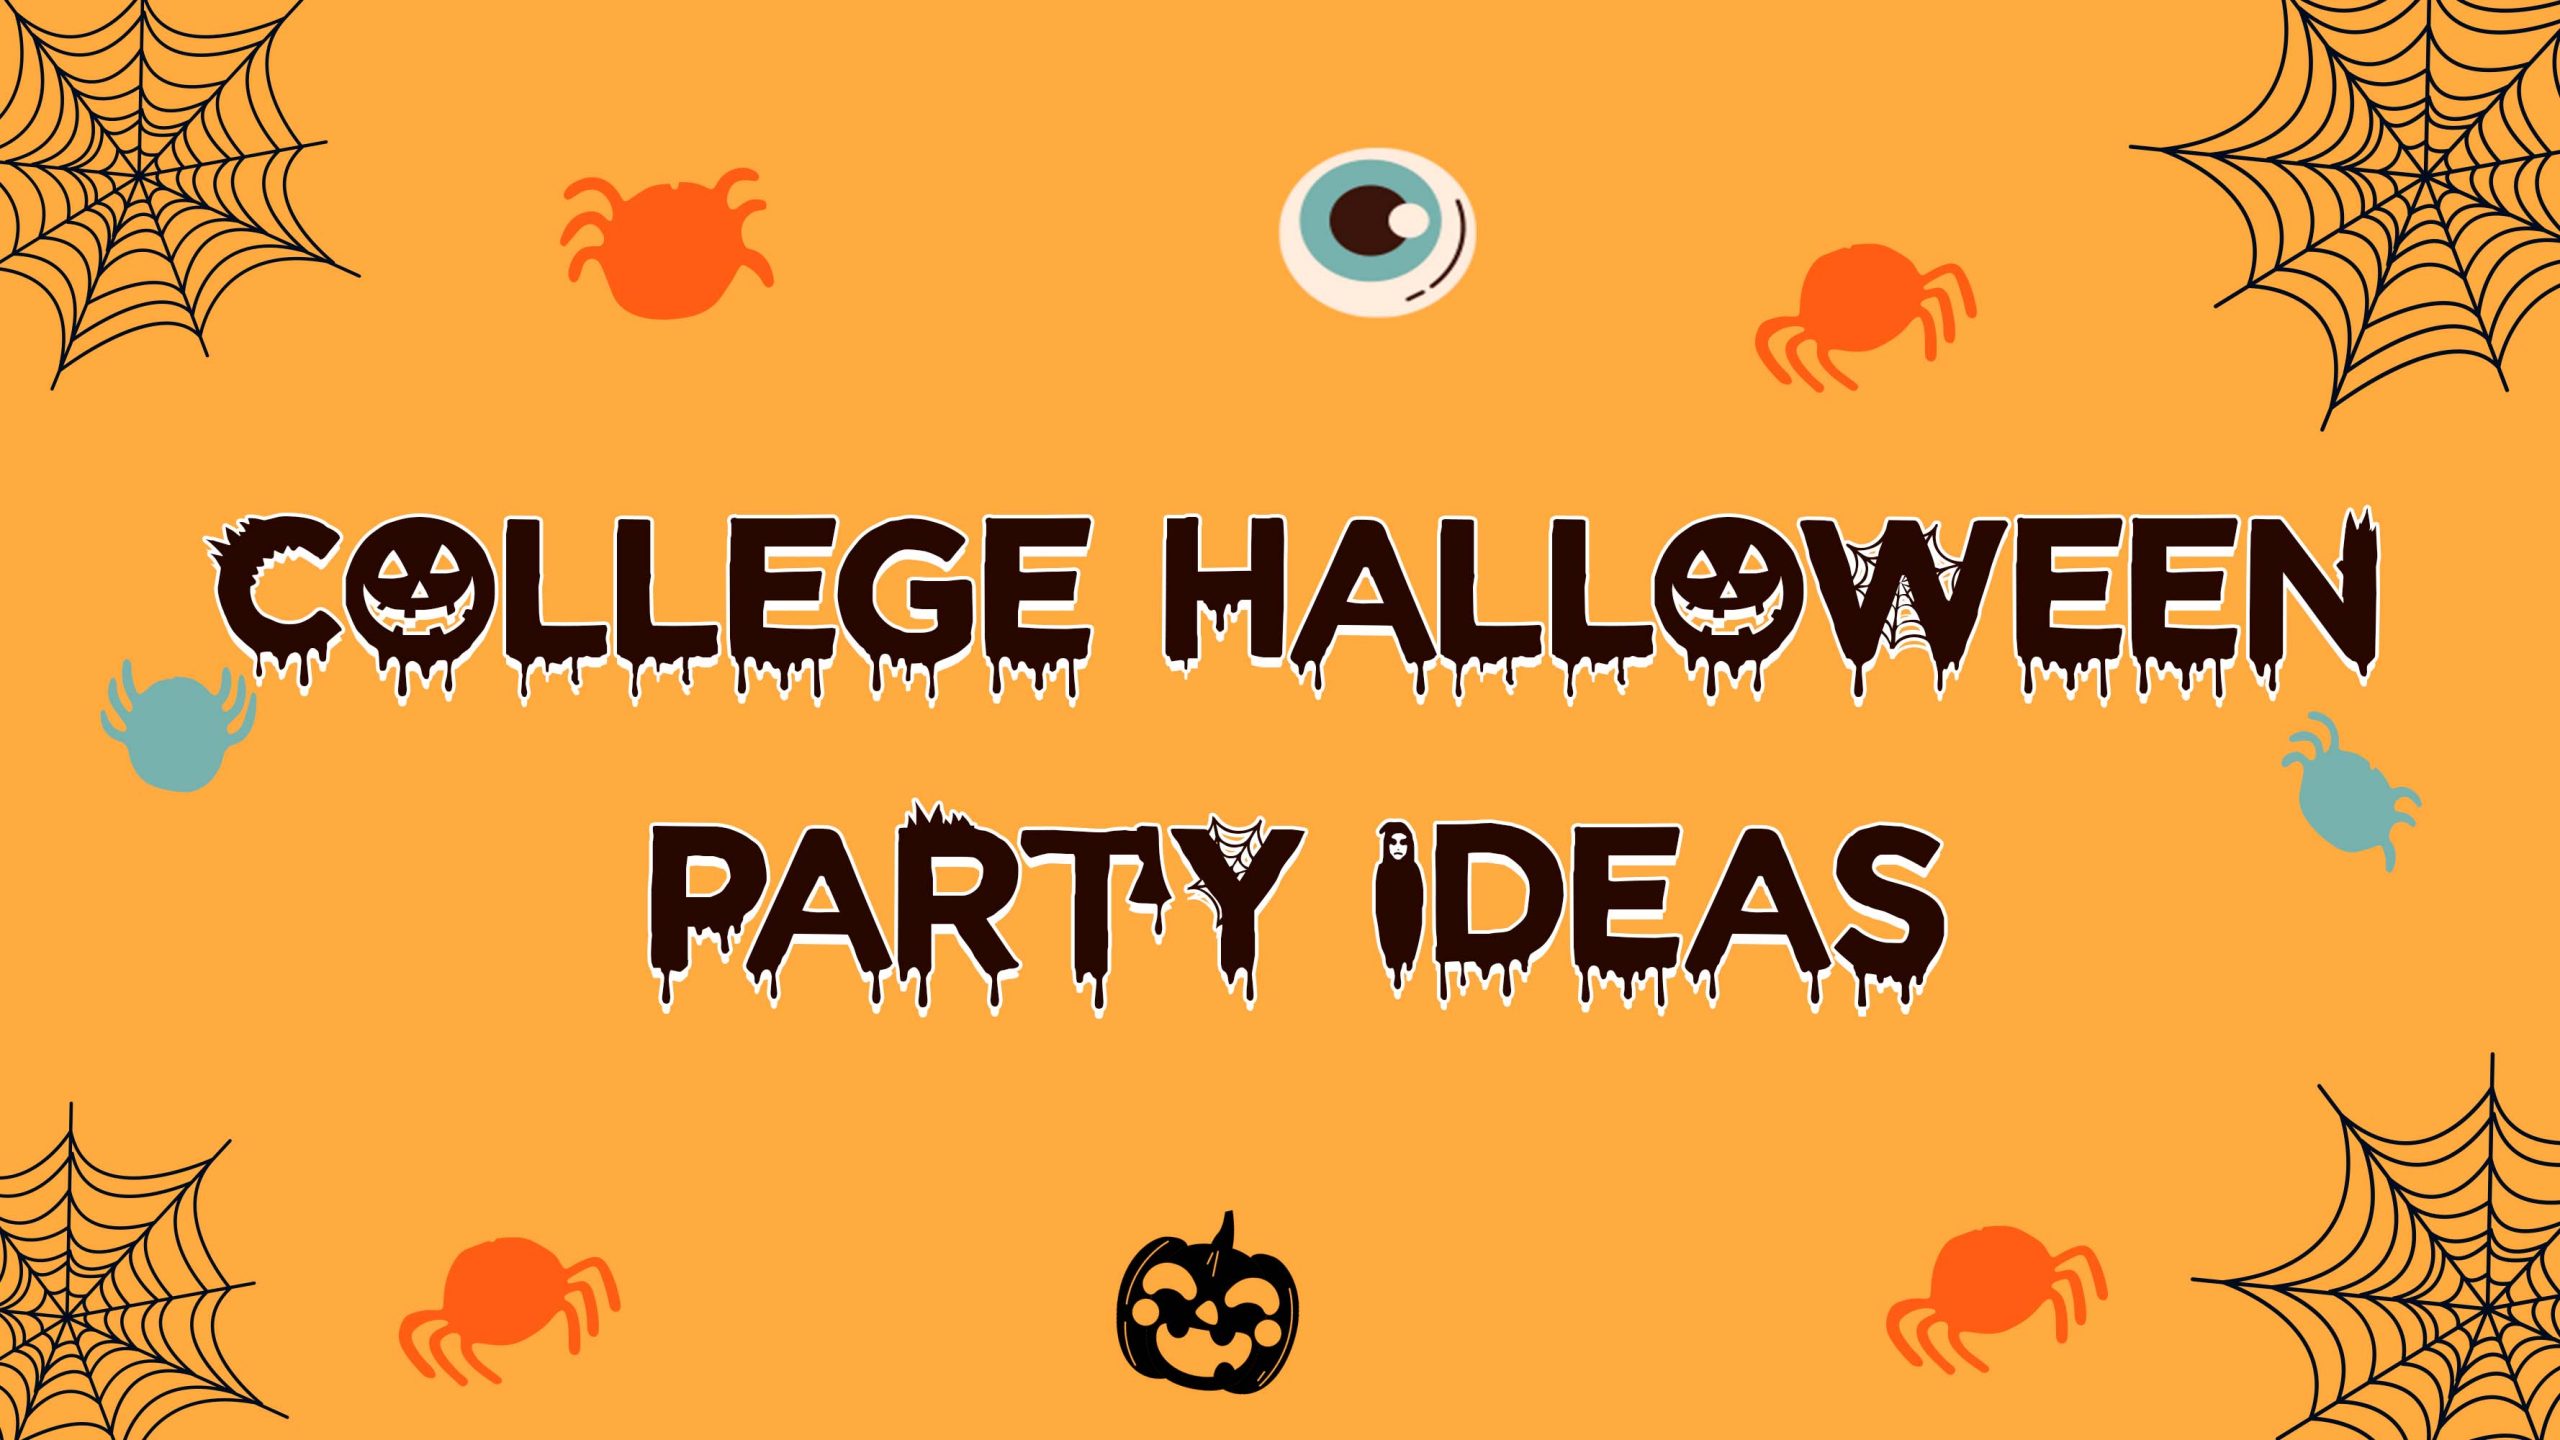 College Halloween Party Ideas